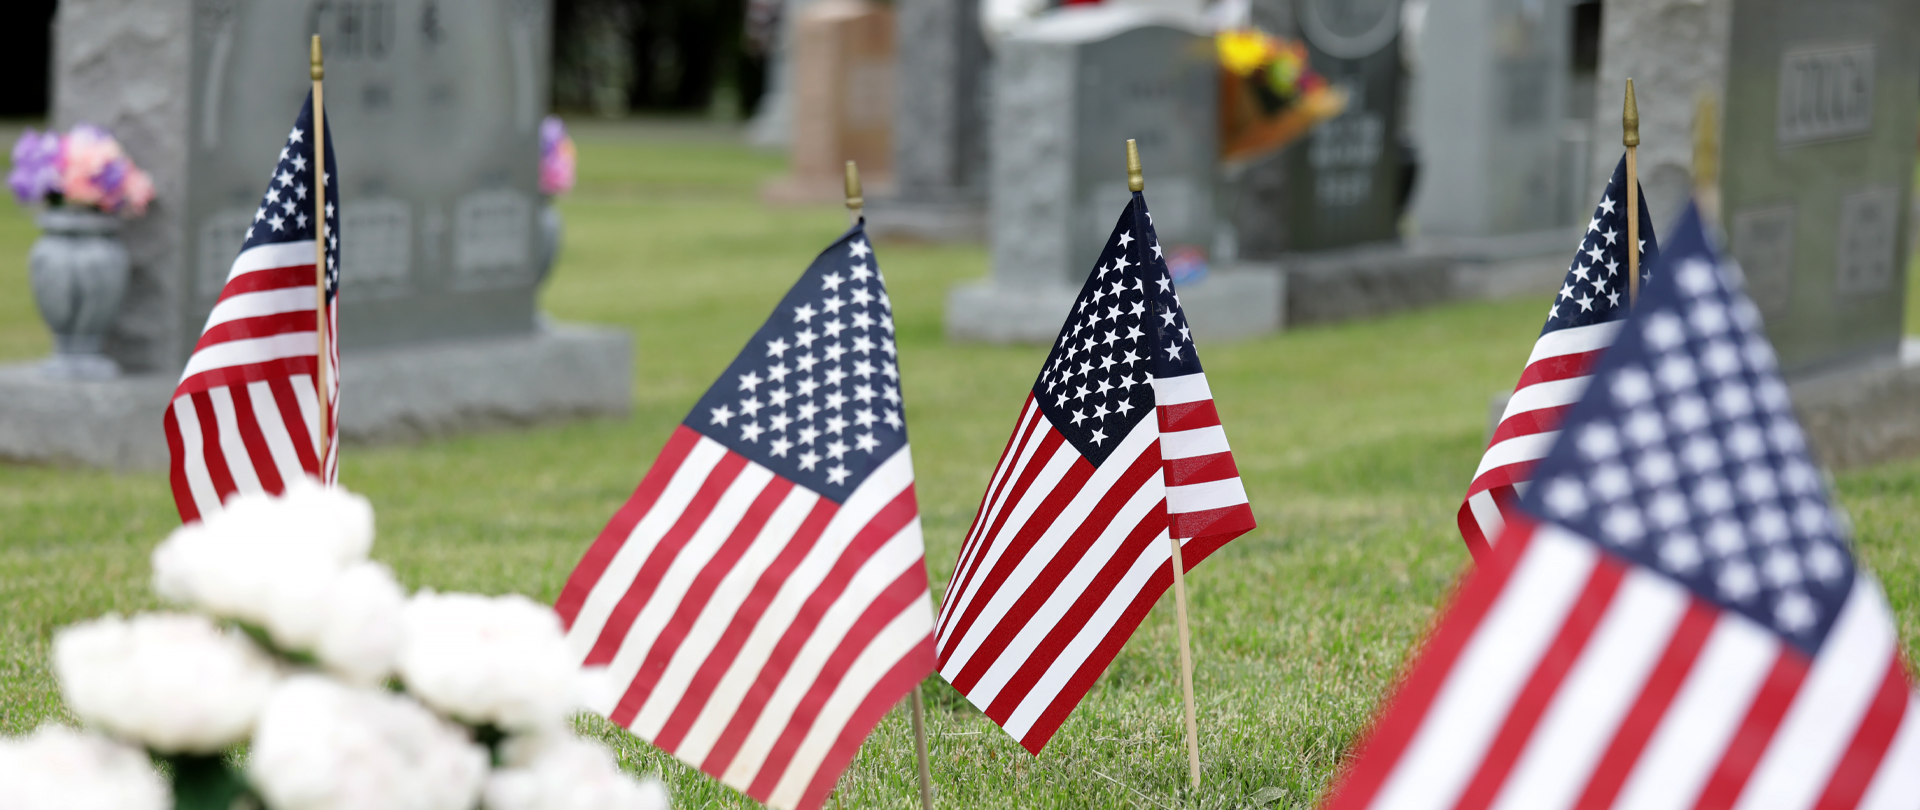 Memorial Day Observances
Memorial Breakfast, May 18
Flag Ceremony, May 16
